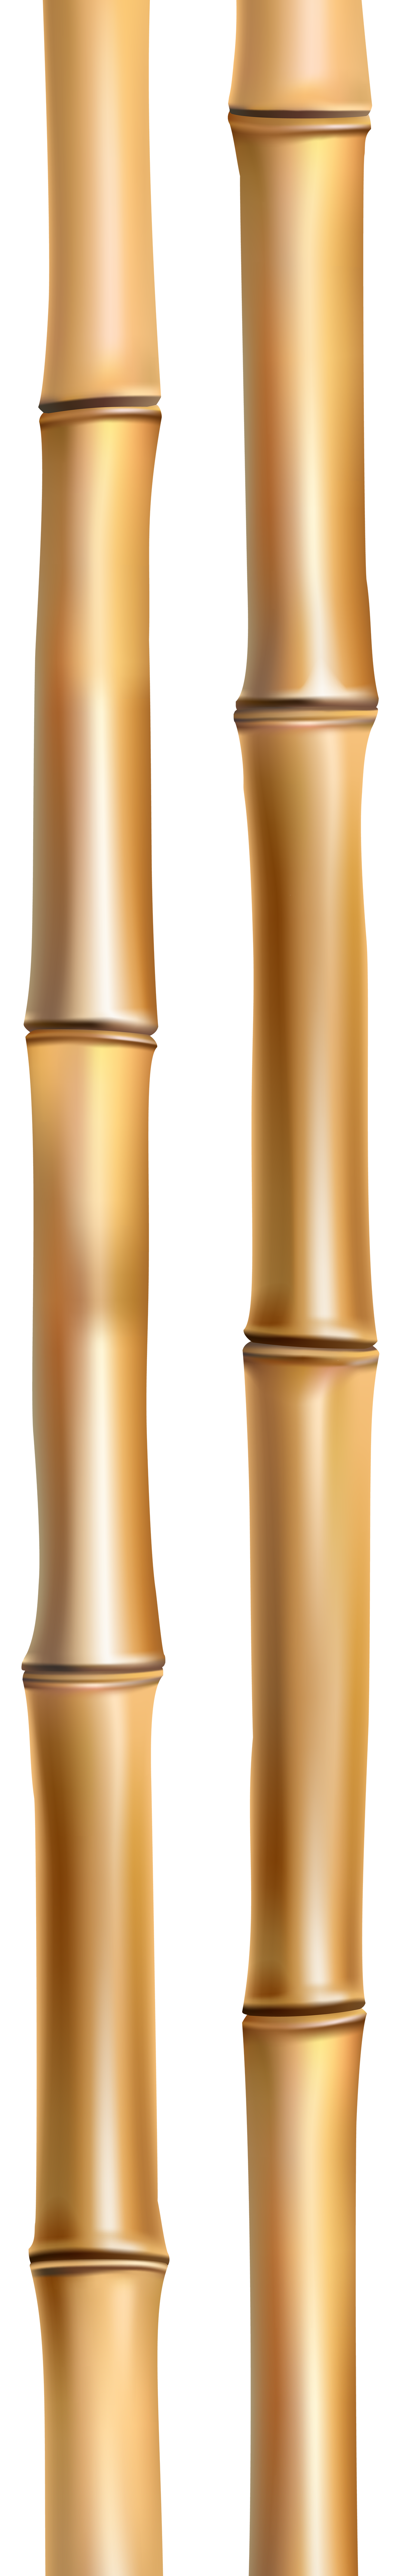 bamboo stick png